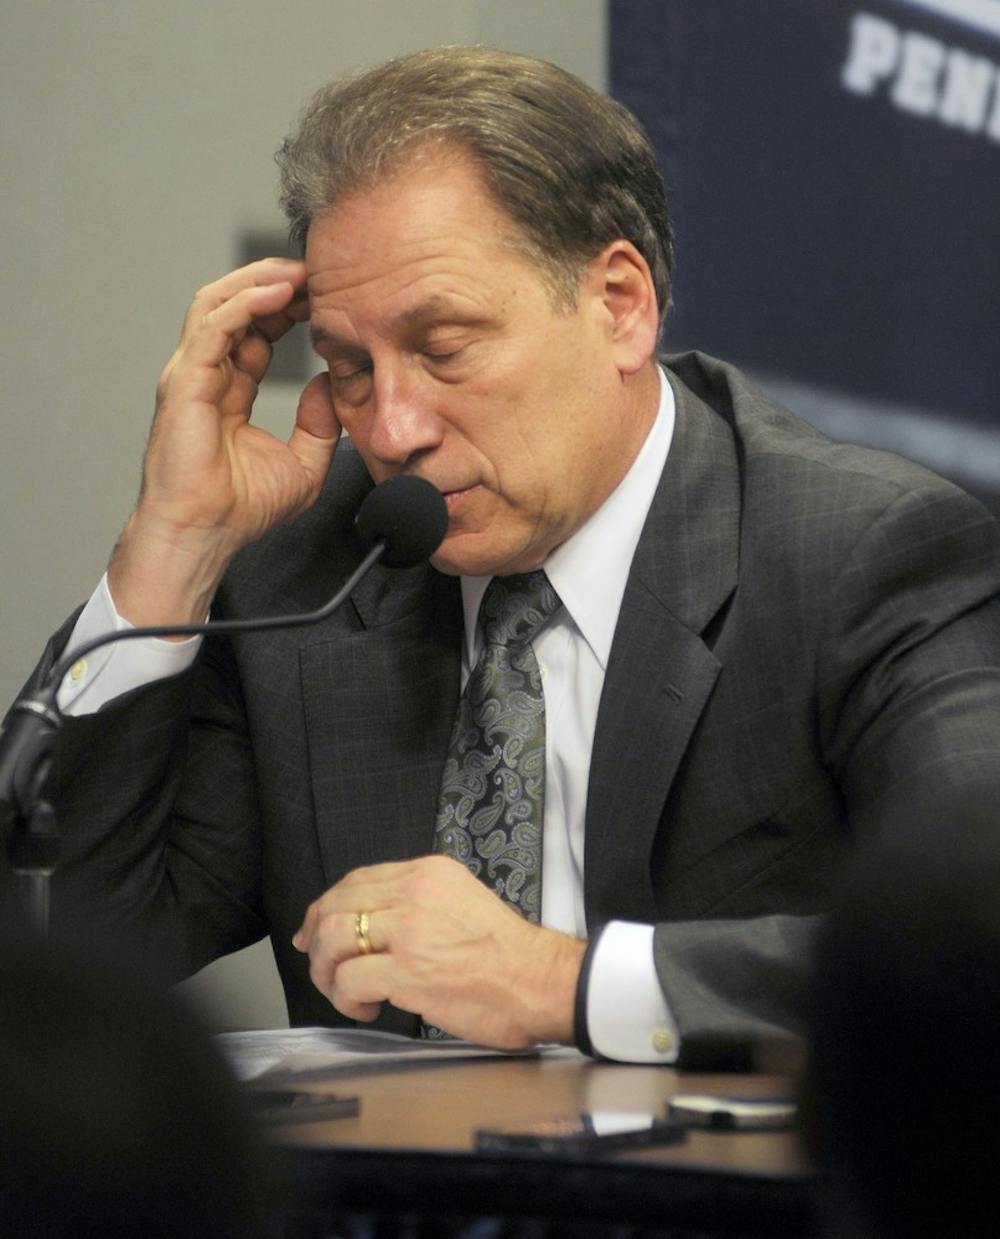 	<p>Michigan State Coach Tom Izzo discusses the fight that broke out between <span class="caps">MSU</span> players just hours before the Spartans defeated Penn State on Wednesday night. David Reiling/The Daily Collegian</p>